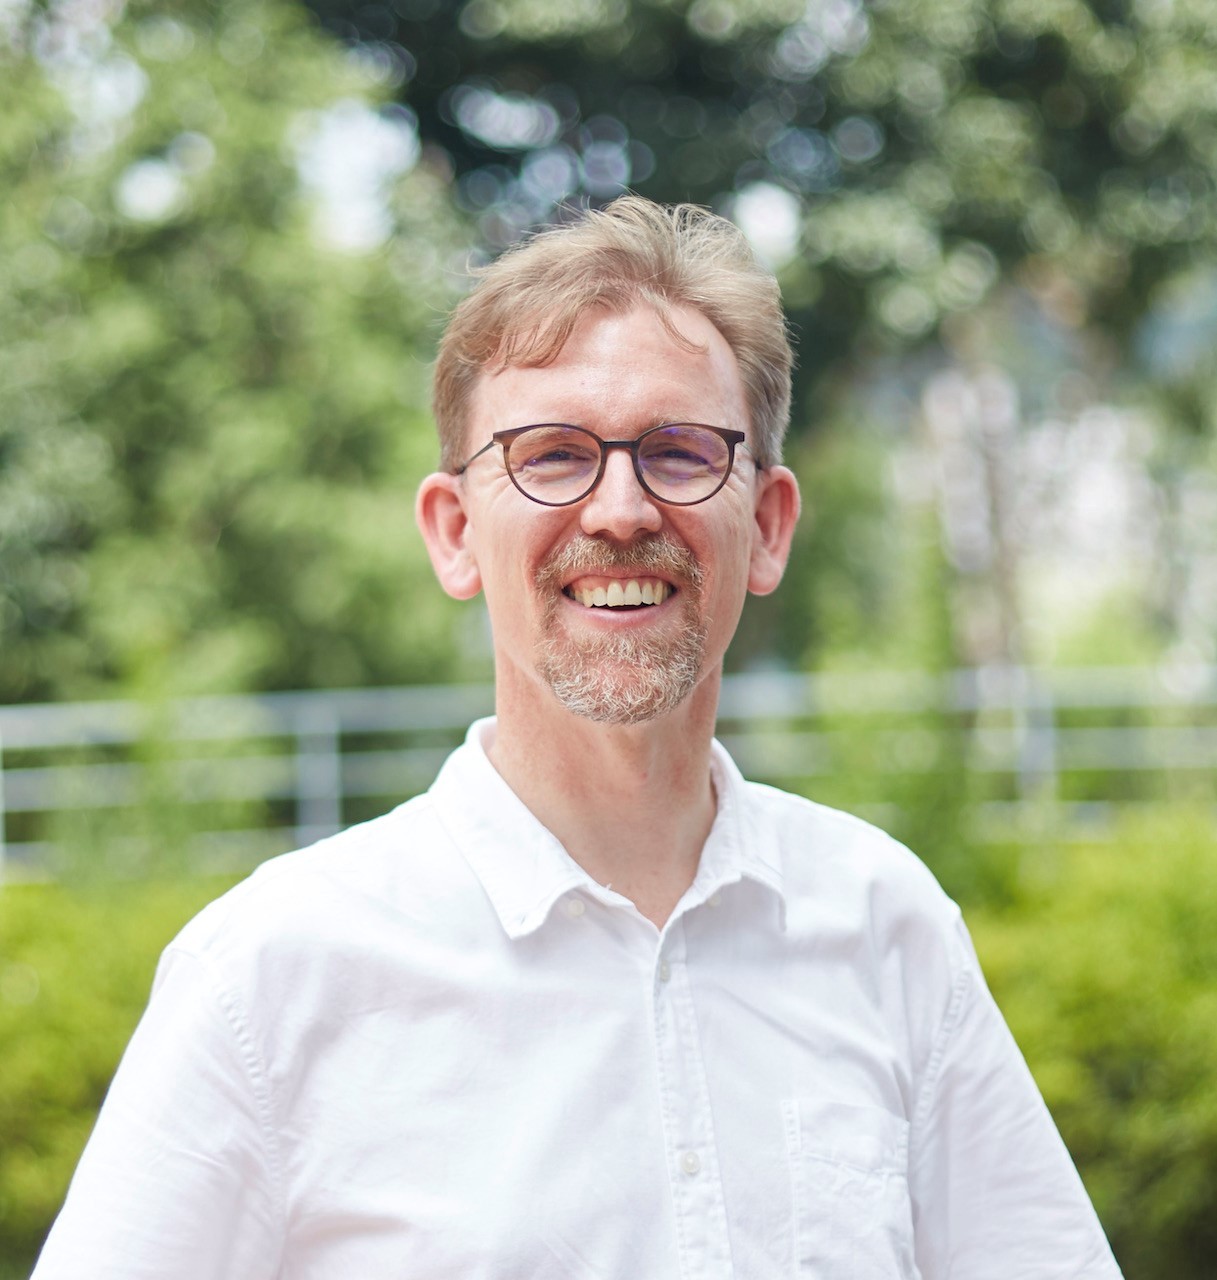 Axel Timmermann, Director of the IBS Center for Climate at Pusan National University